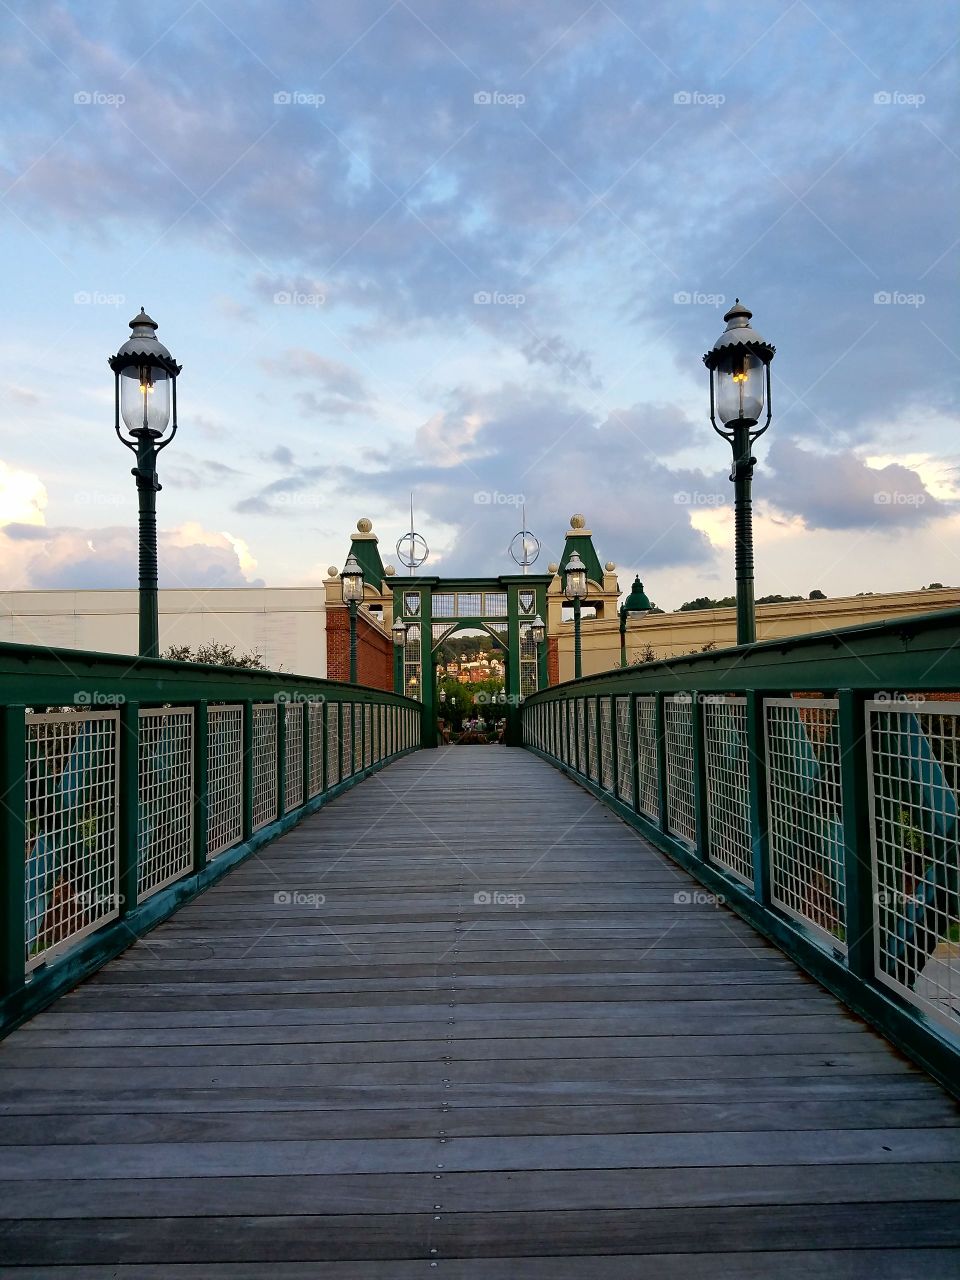 The bridge going to the store plaza at The Waterfront